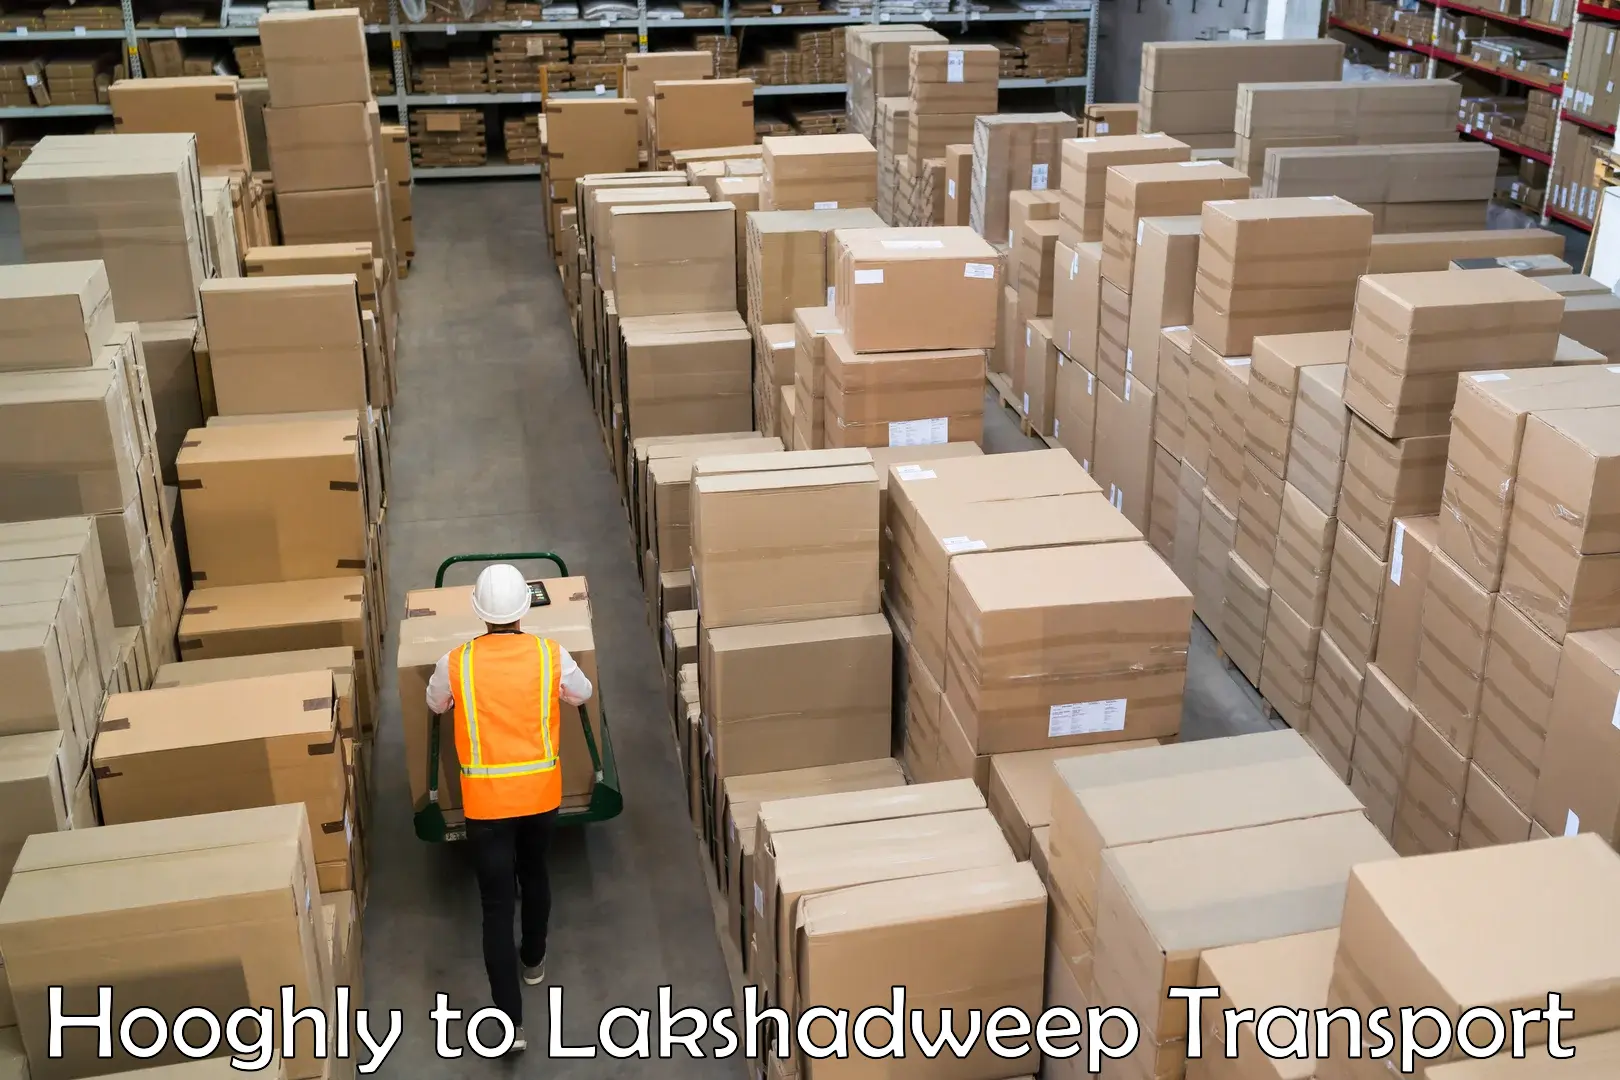 Parcel transport services Hooghly to Lakshadweep